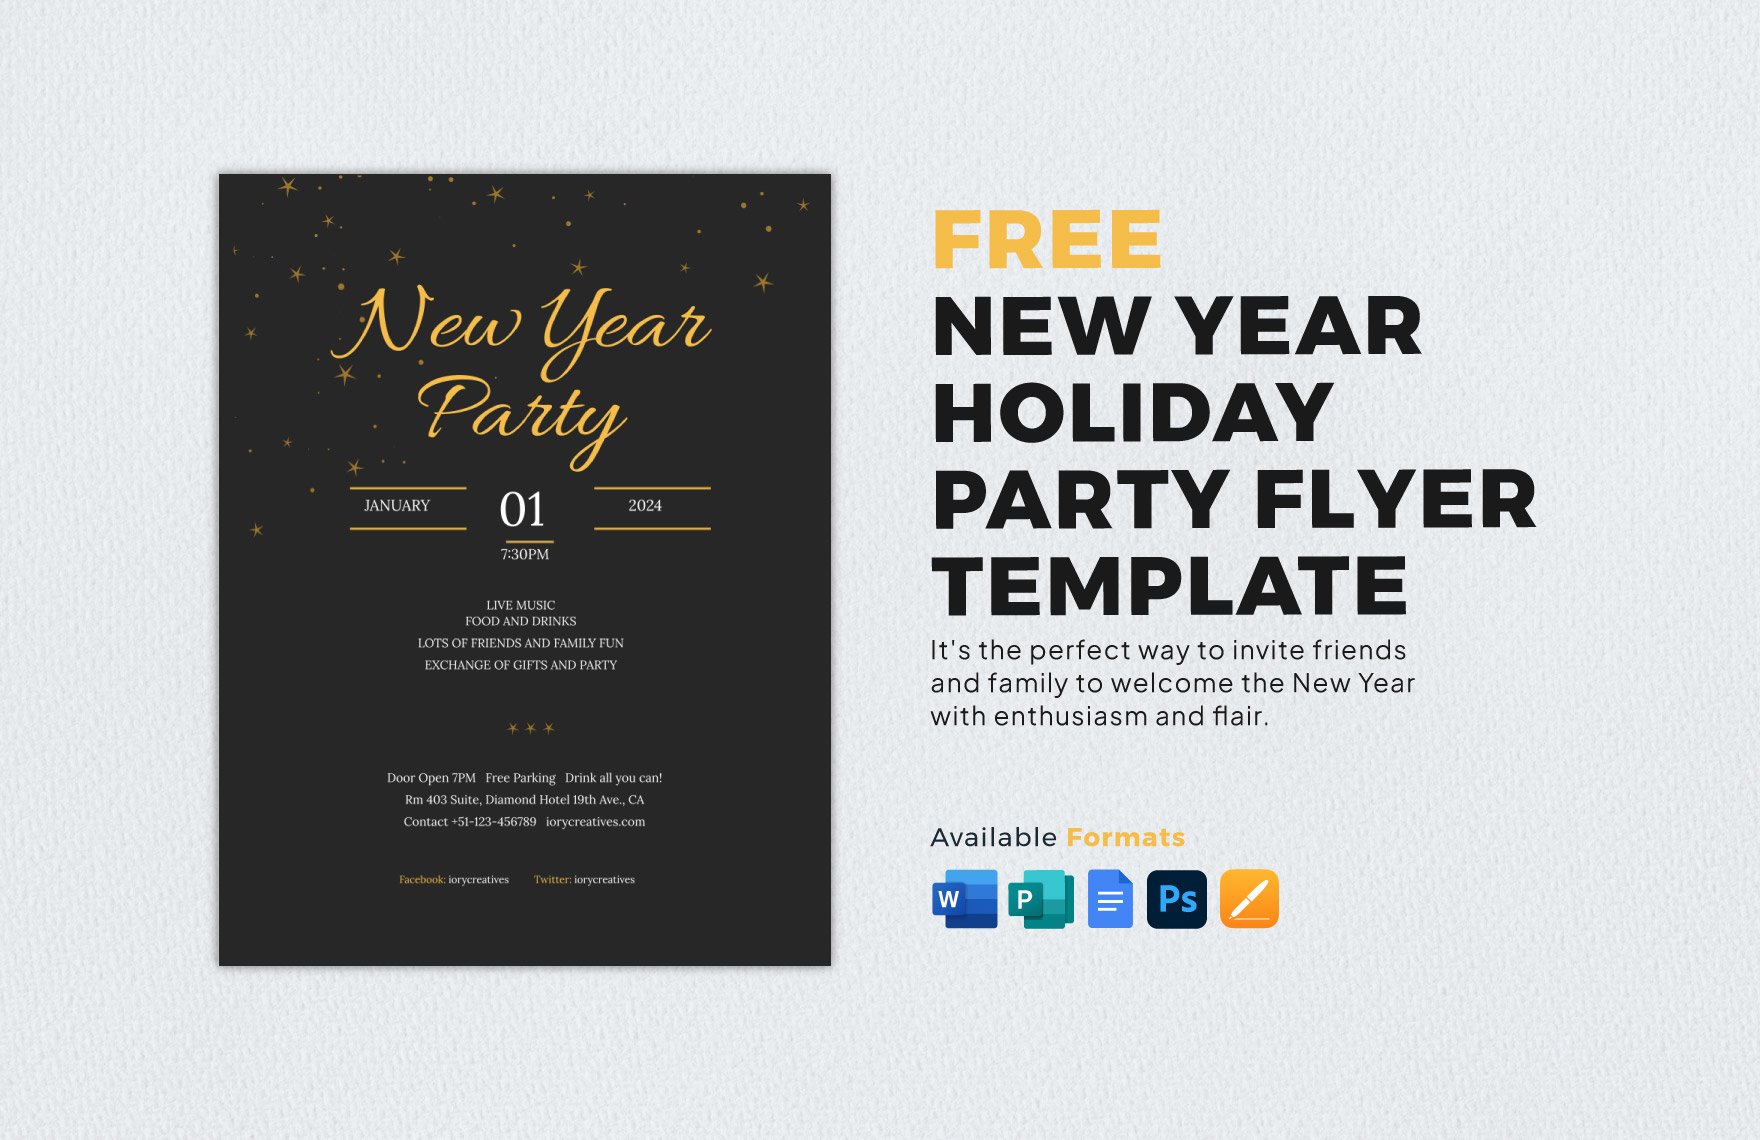 New Year Holiday Party Flyer Template